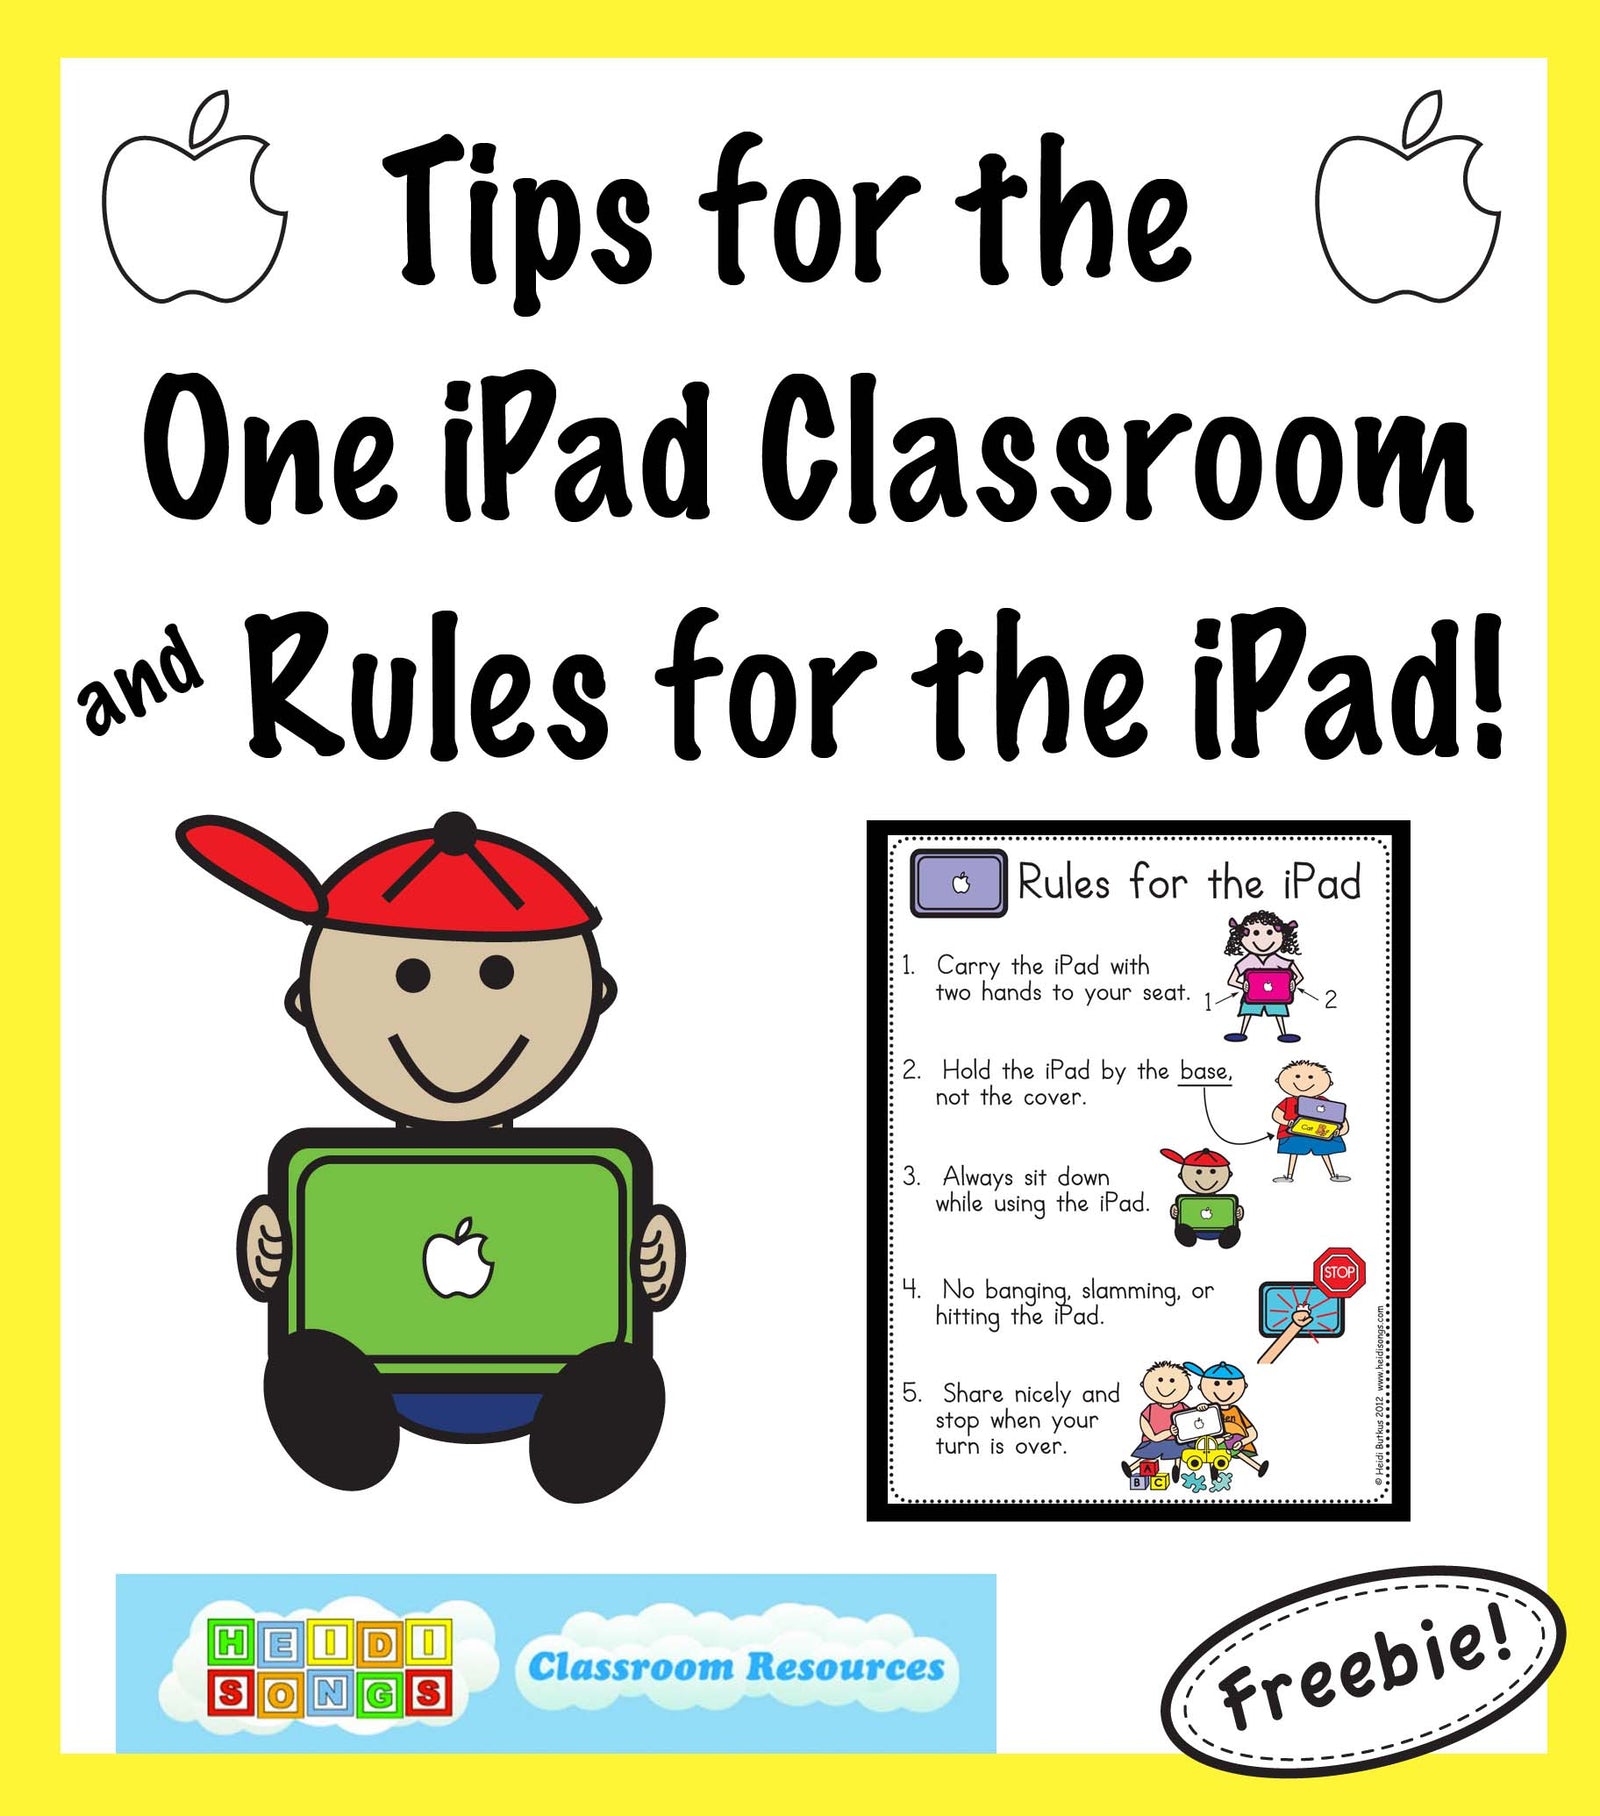 Tips for the One iPad Classroom